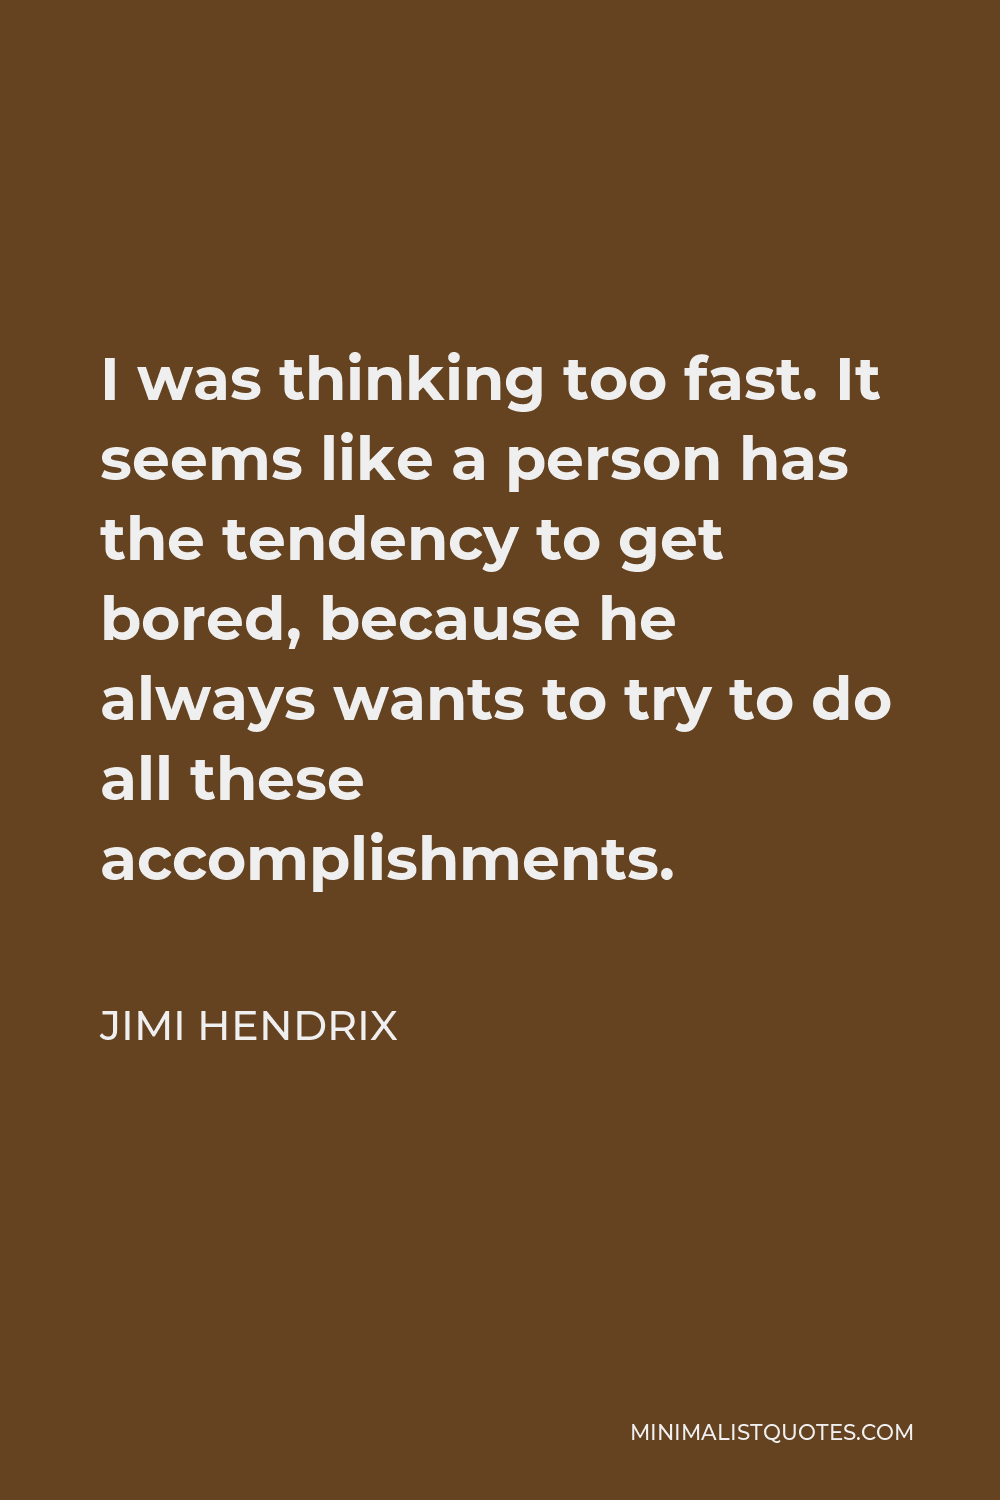 Jimi Hendrix Quote - I was thinking too fast. It seems like a person has the tendency to get bored, because he always wants to try to do all these accomplishments.